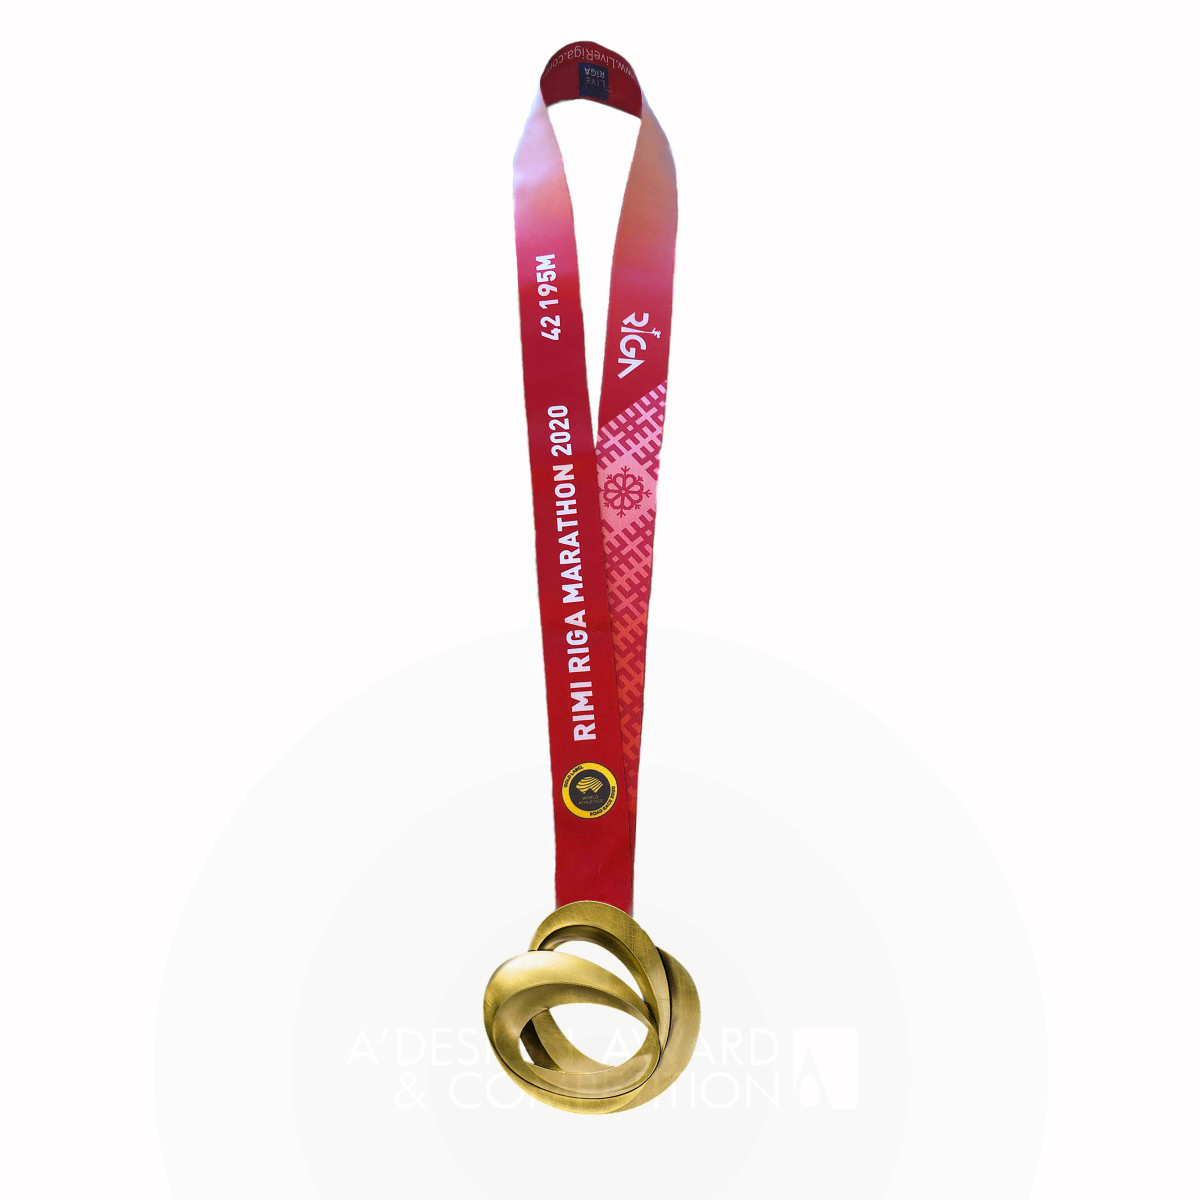 Junichi Kawanishi wins Bronze at the prestigious A' Award, Trophy, Prize and Competition Design Award with Rimi Riga Marathon 2020 Runner's Medals.